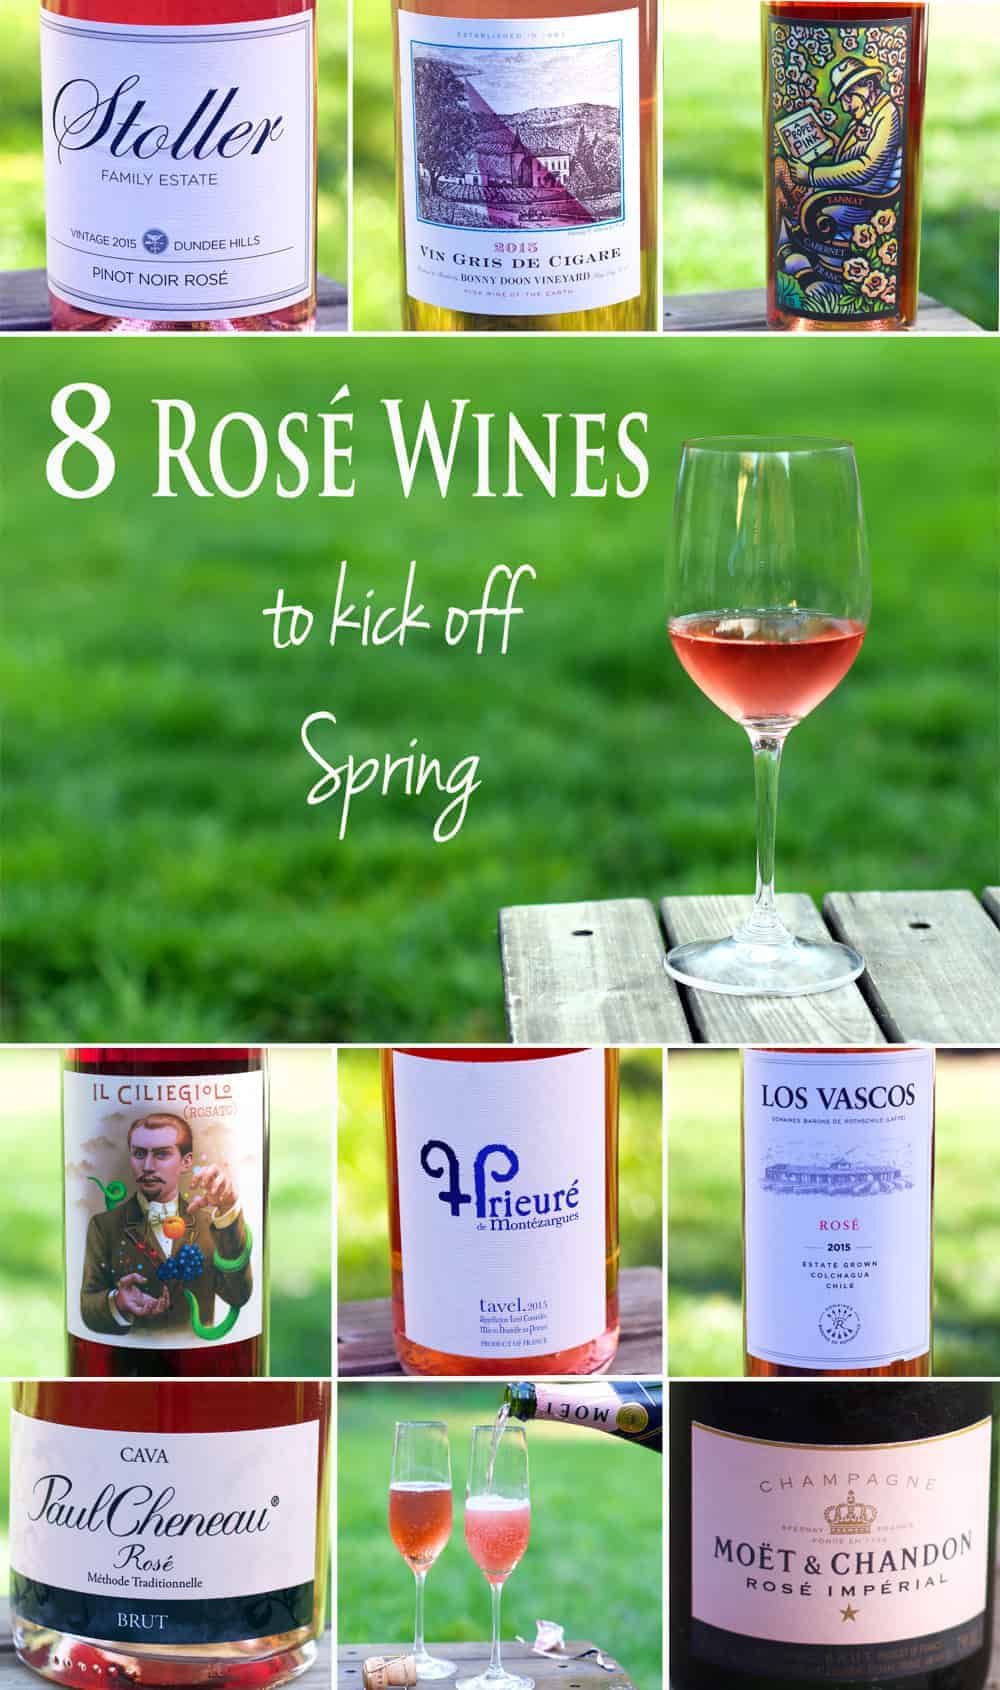 8 Rosé Wines to Kick off Spring 2016